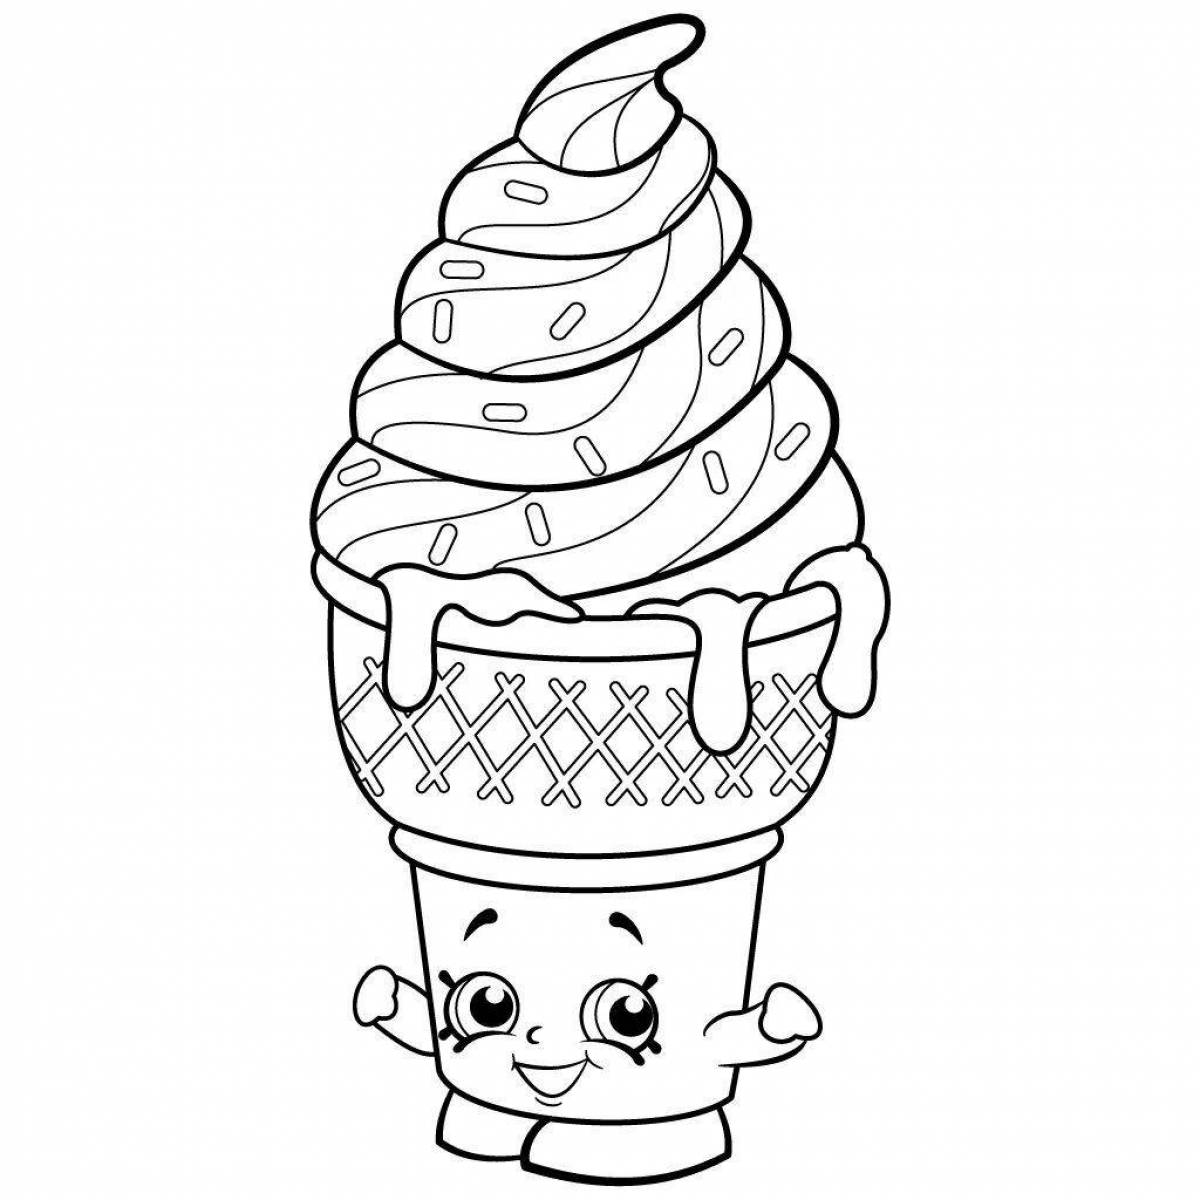 Fabulous ice cream coloring page